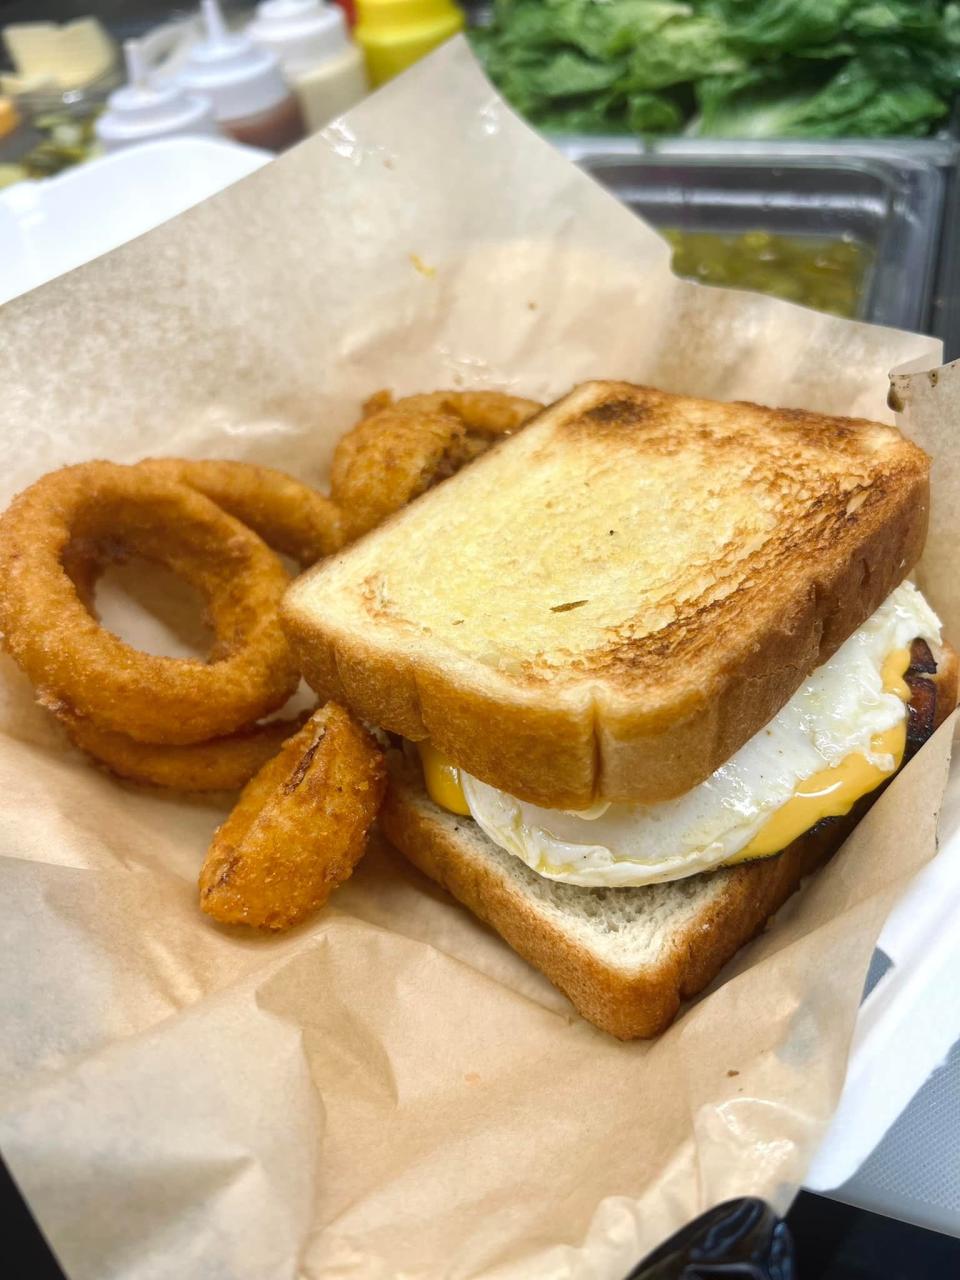 The Top Bun Cougar is a smoked fried bologna topped with a fried egg, American cheese, mayo and mustard served on Texas toast. All entrées are served with one side, such as these hand breaded onion rings.